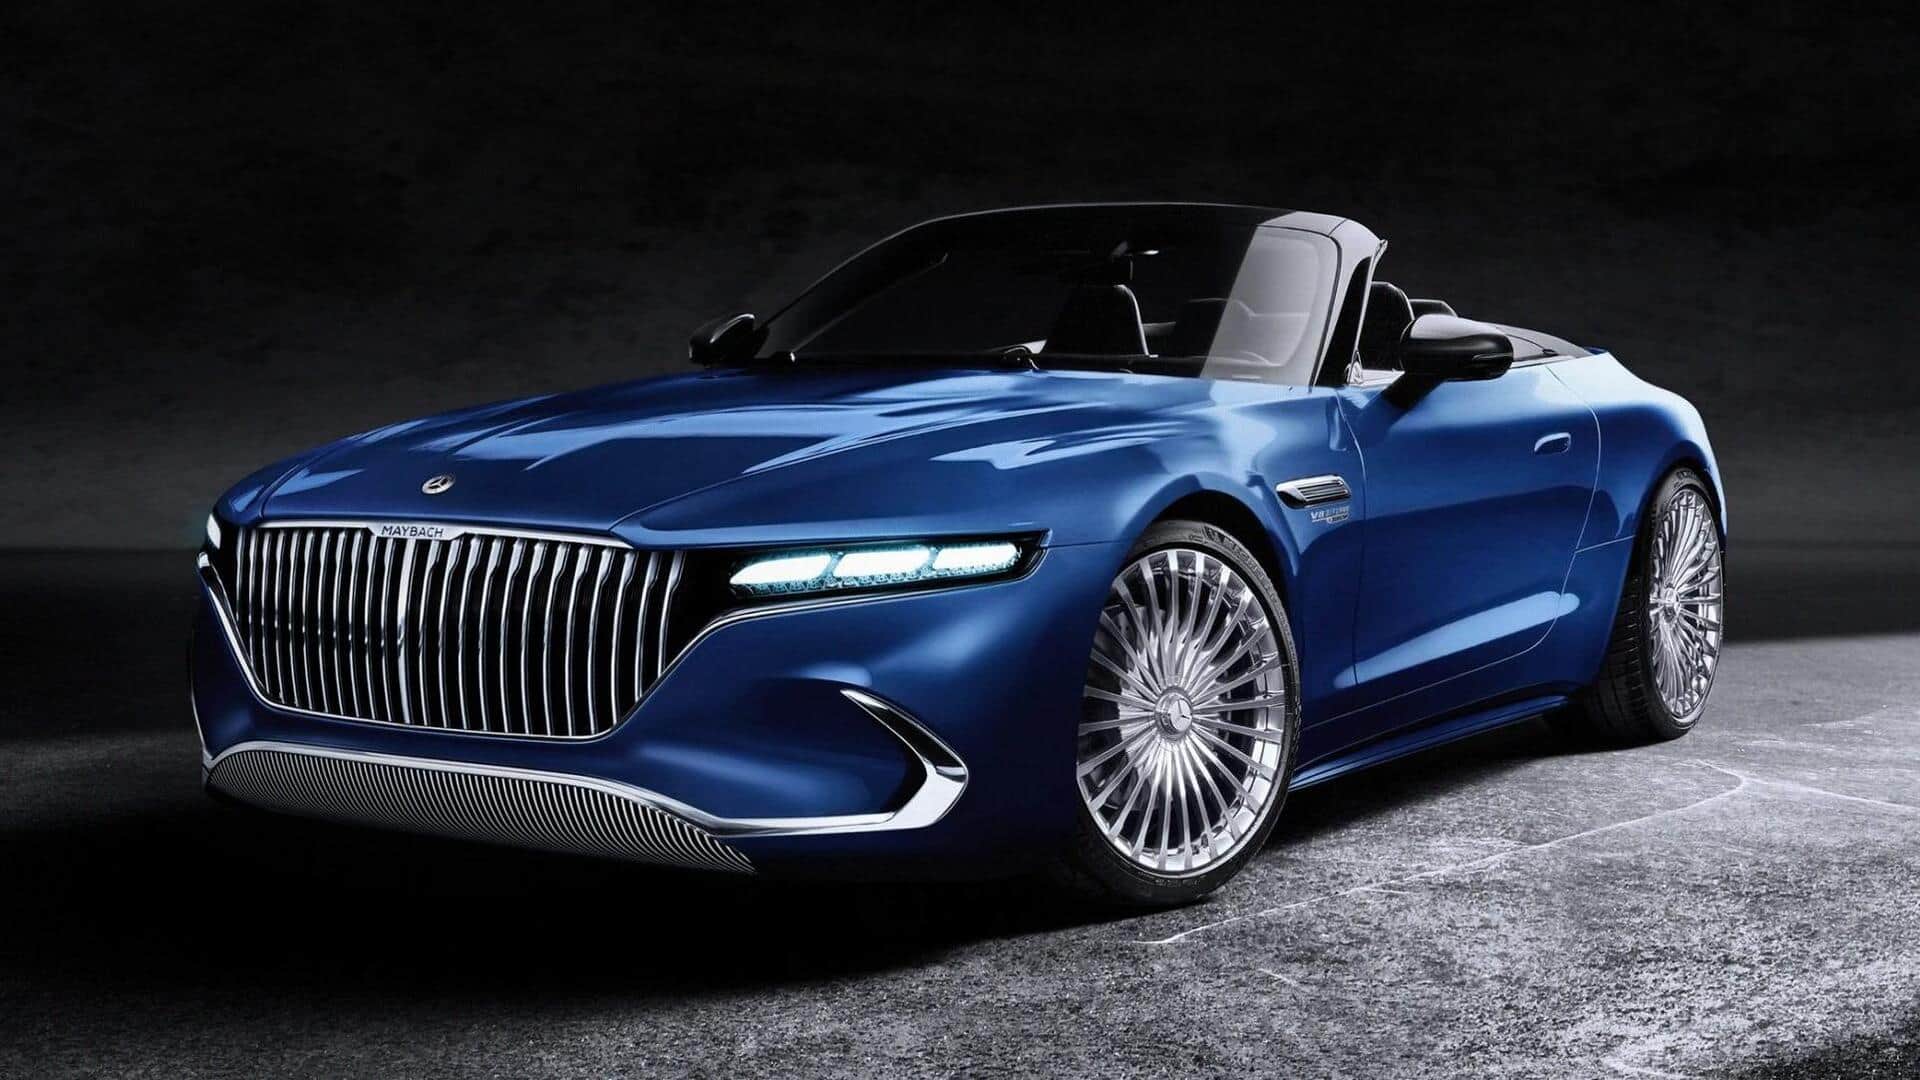 Mercedes-Benz's first ultra-luxury Mythos model to debut in 2025